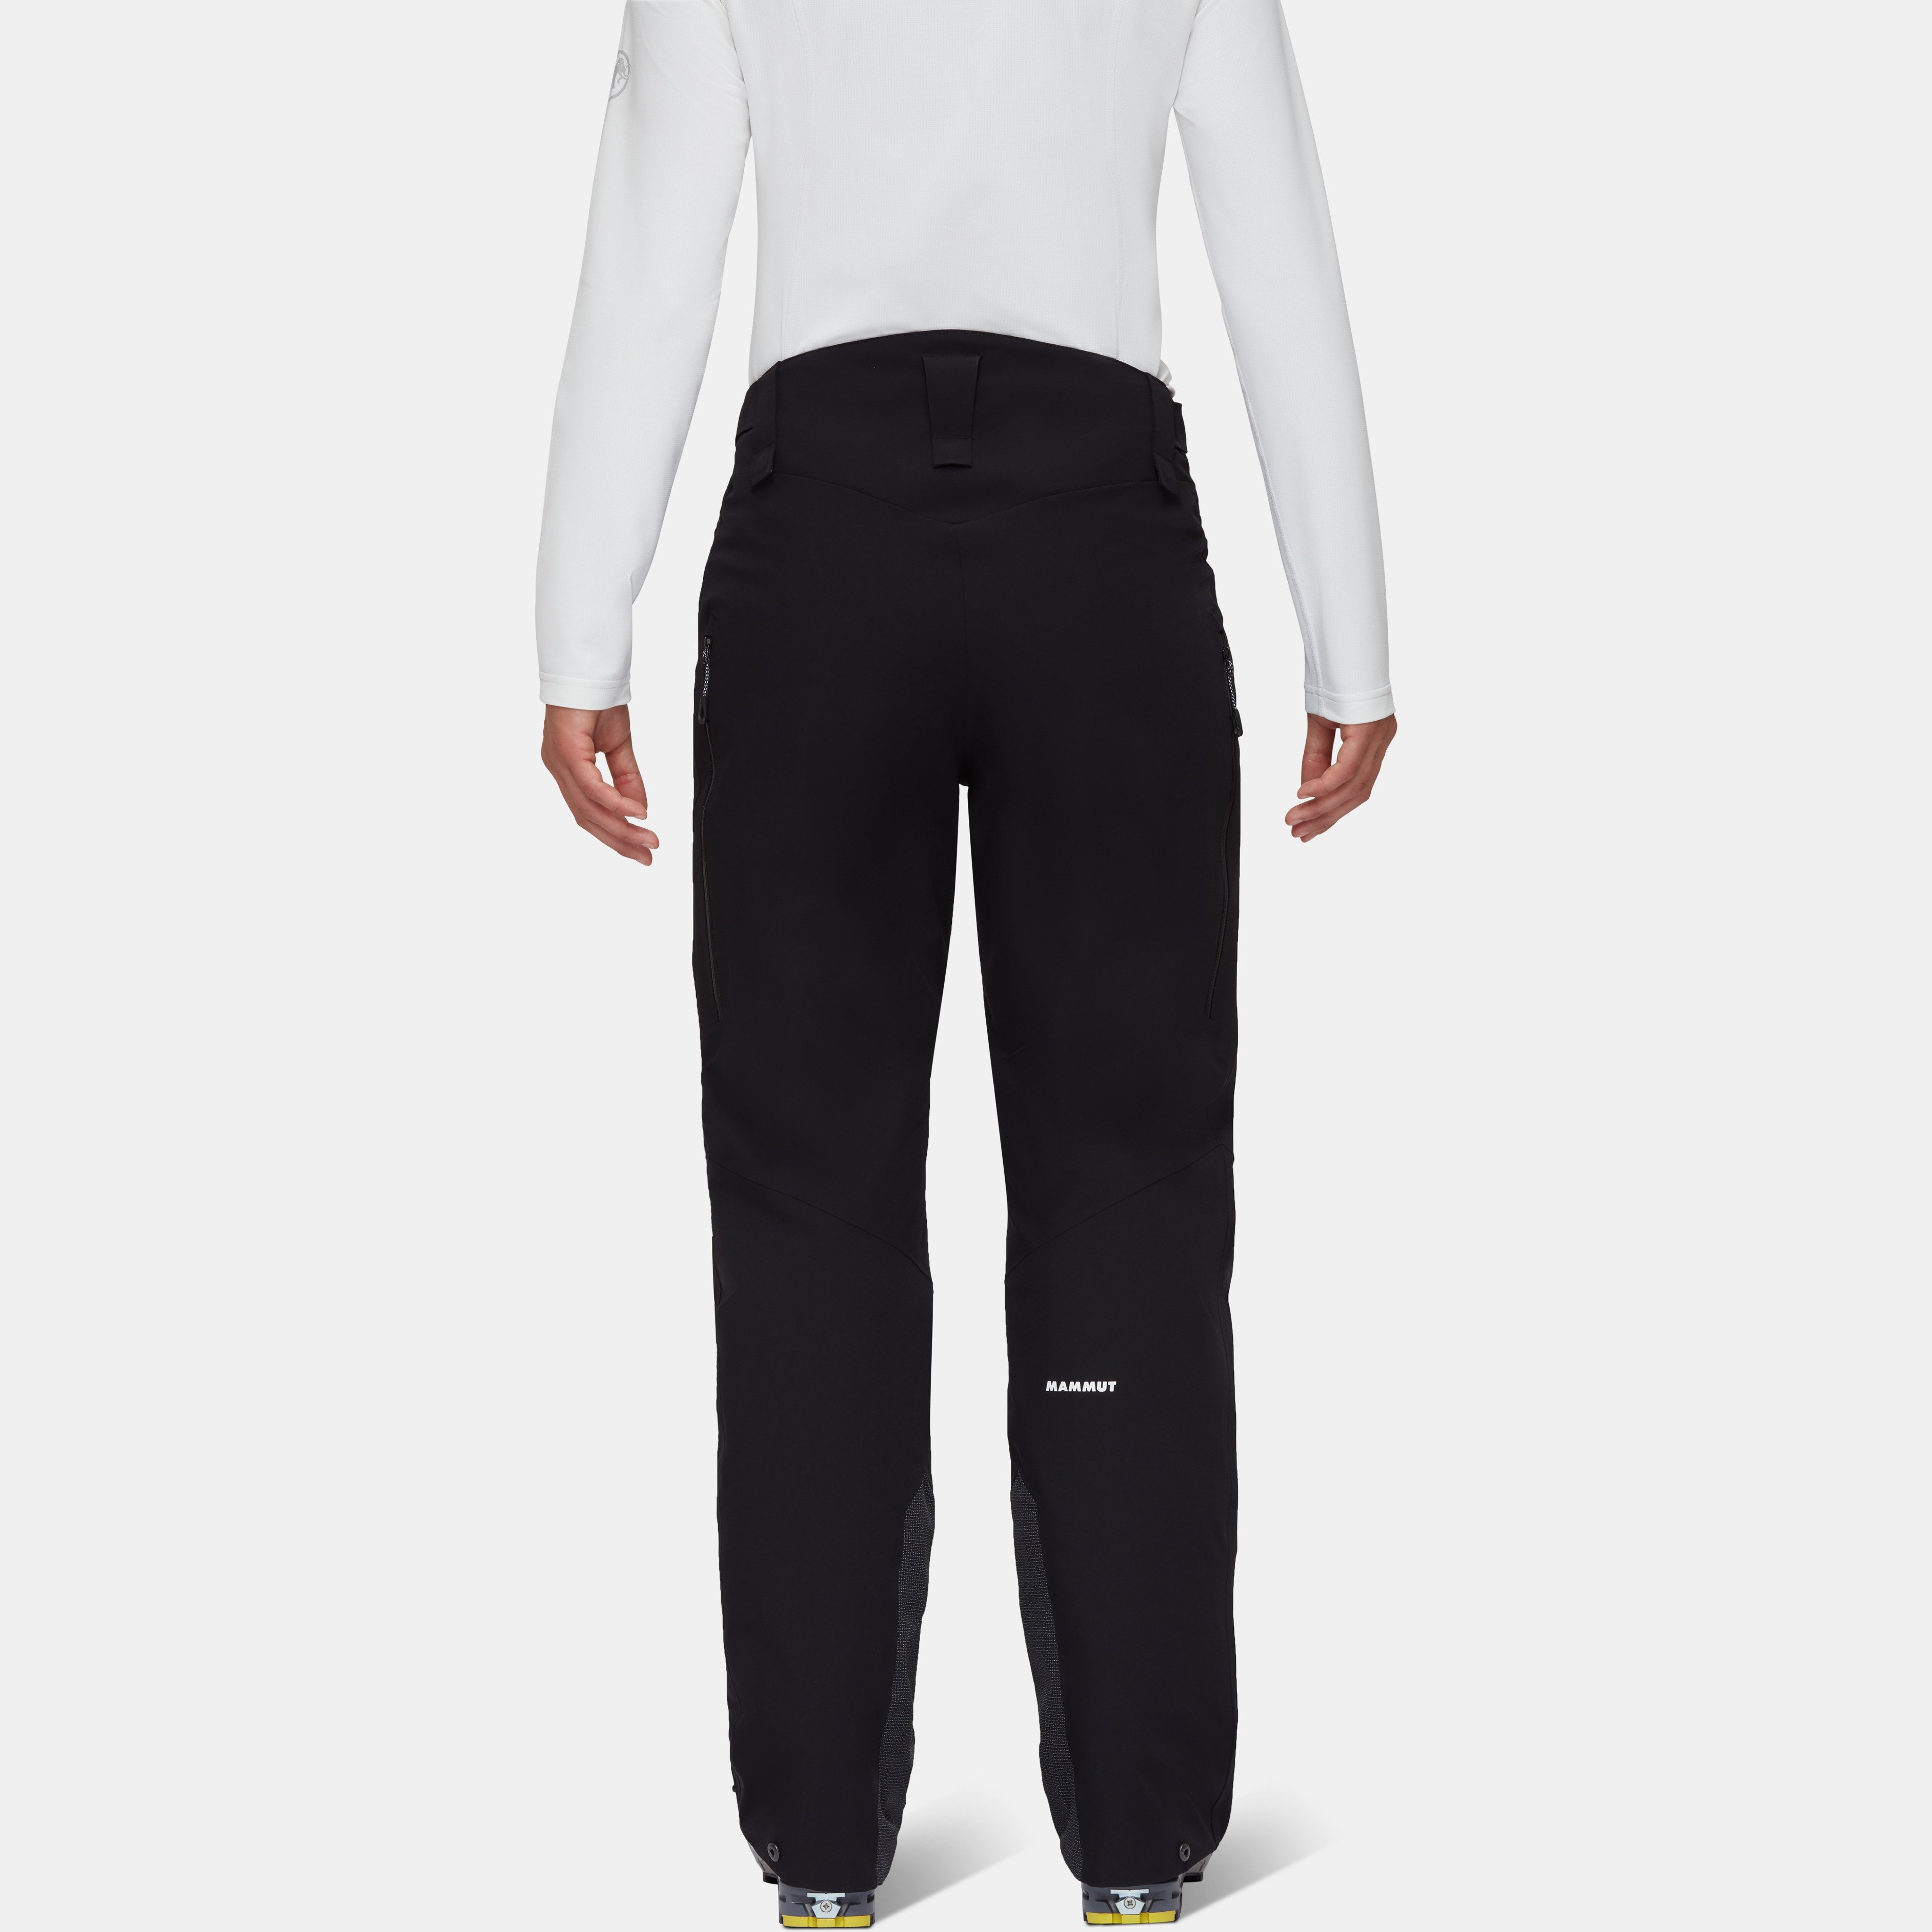 Stoney HS Thermo Pants Women product image